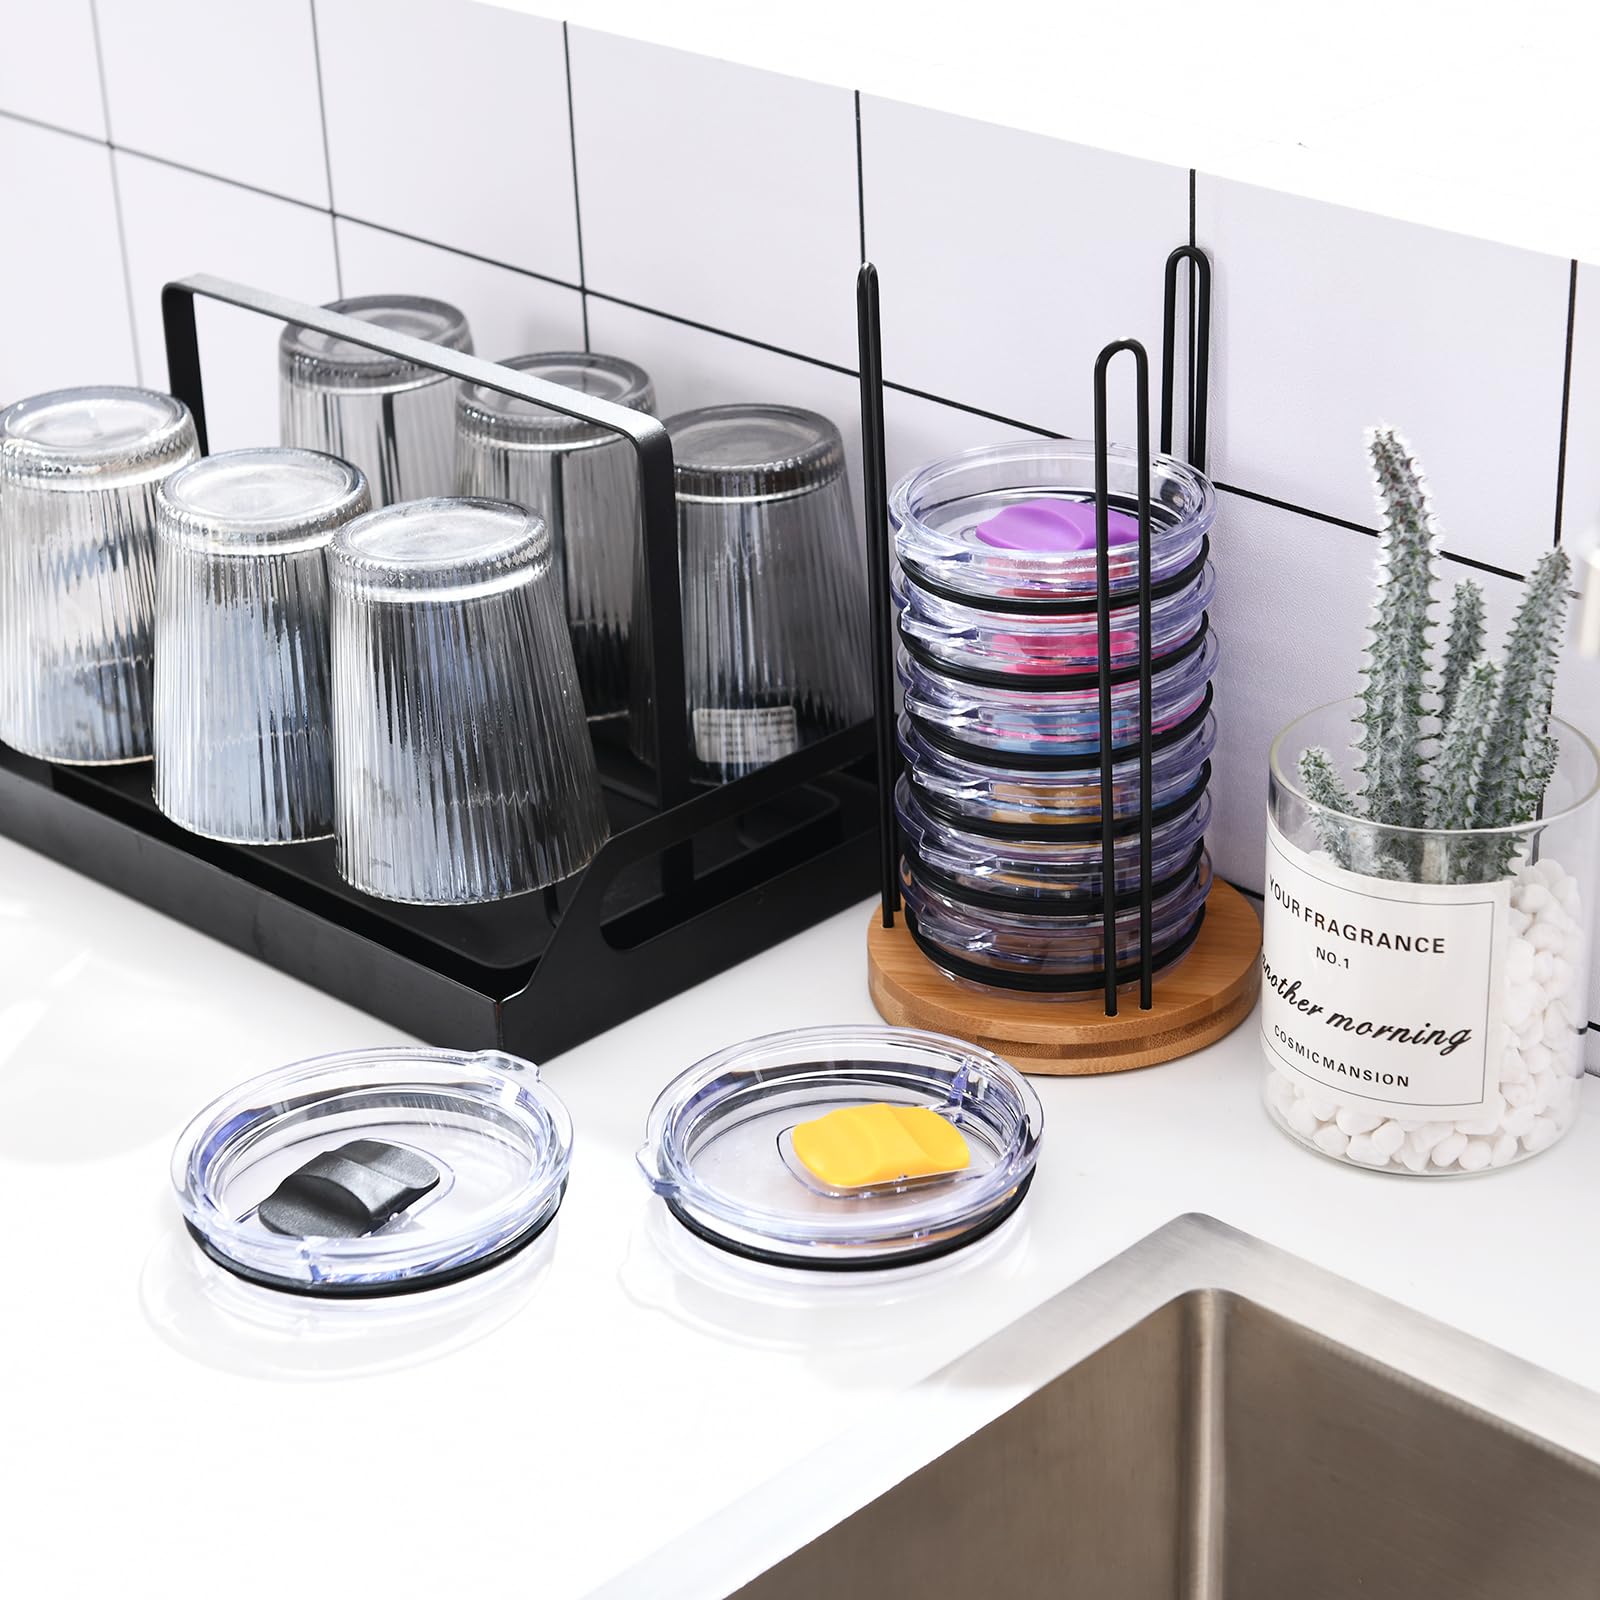 witarten Tumbler Lid Organizer, Detachable Bamboo Cup Lid， Vertical Storage for Up to 10 Lids，Keep Your Tumbler Lids Neatly Stored and Achieve Clutter-Free Cabinets and Countertops Organization